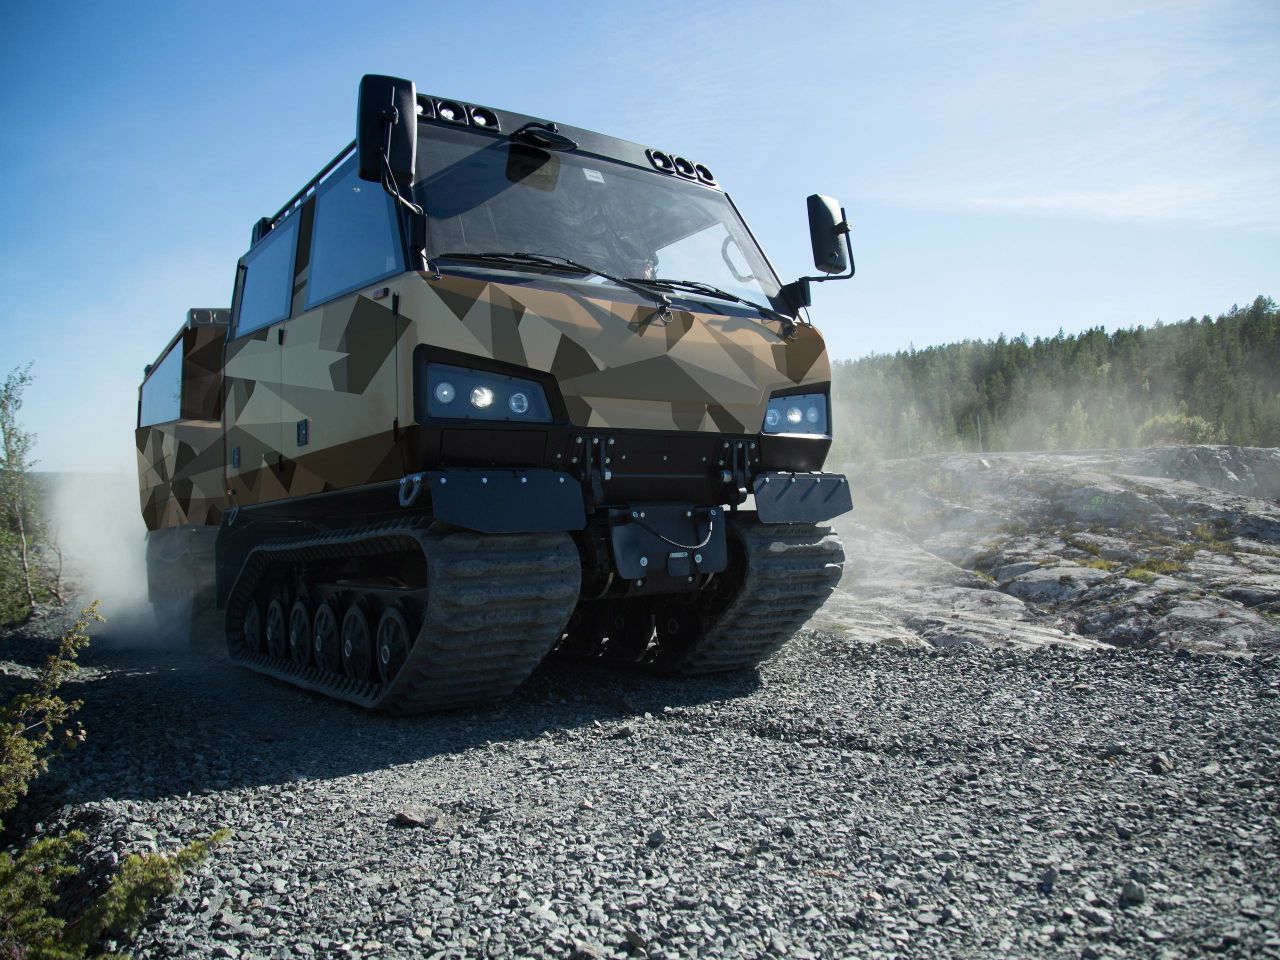 New amphibious all-terrain vehicle unveiled as successor to BV206